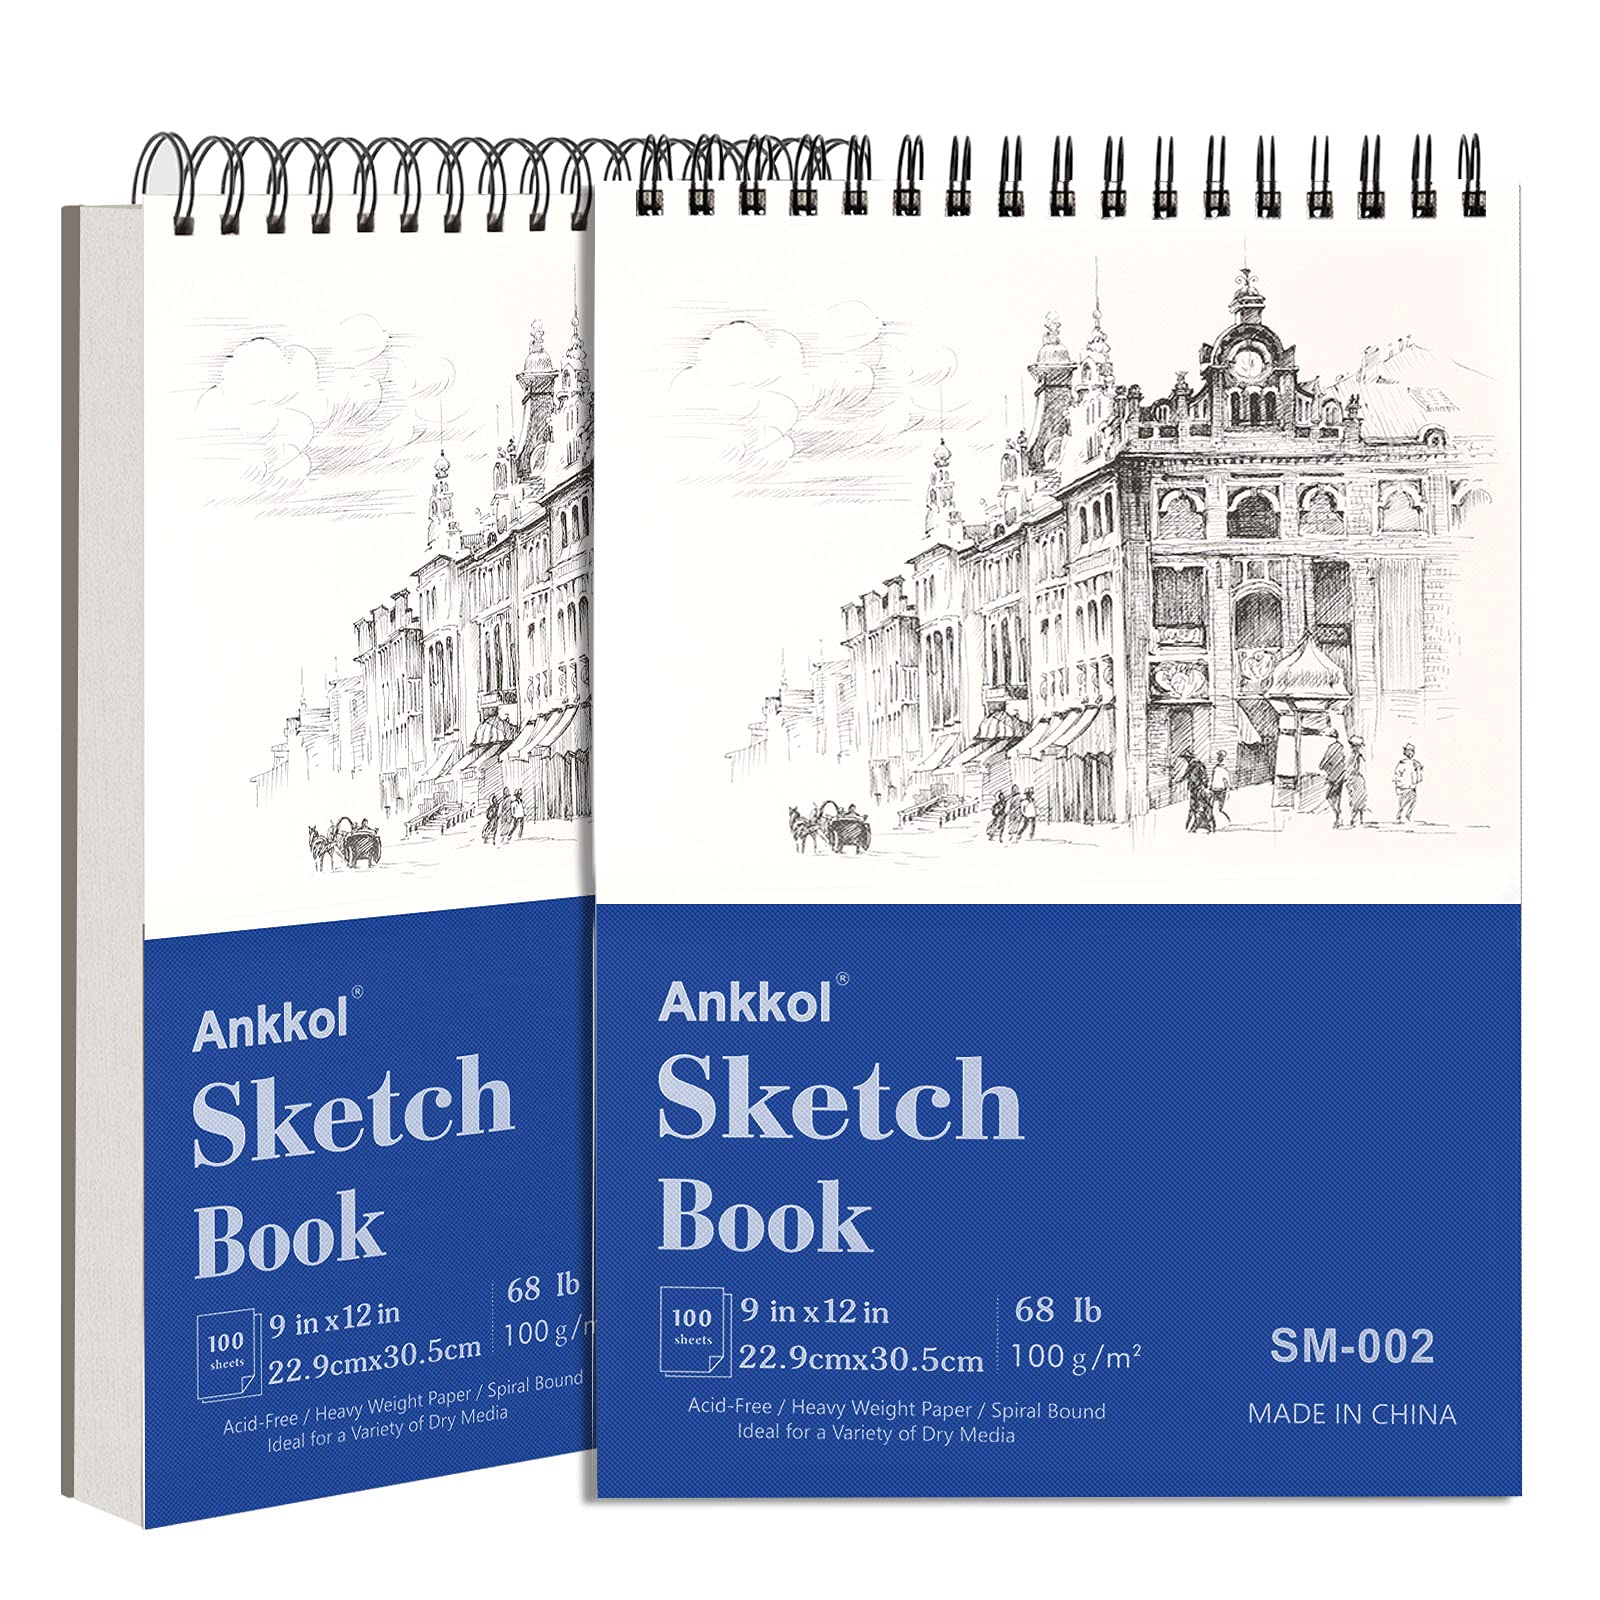  Ankkol 9x12 Sketchbook, Sketch Book Pack of 2, 200 Sheets (68  lb/100gsm), Spiral Bound Artist Sketch Pad, 100 Sheets Each, Durable Acid  Free Drawing Paper, Ideal for Adults & Teens. 